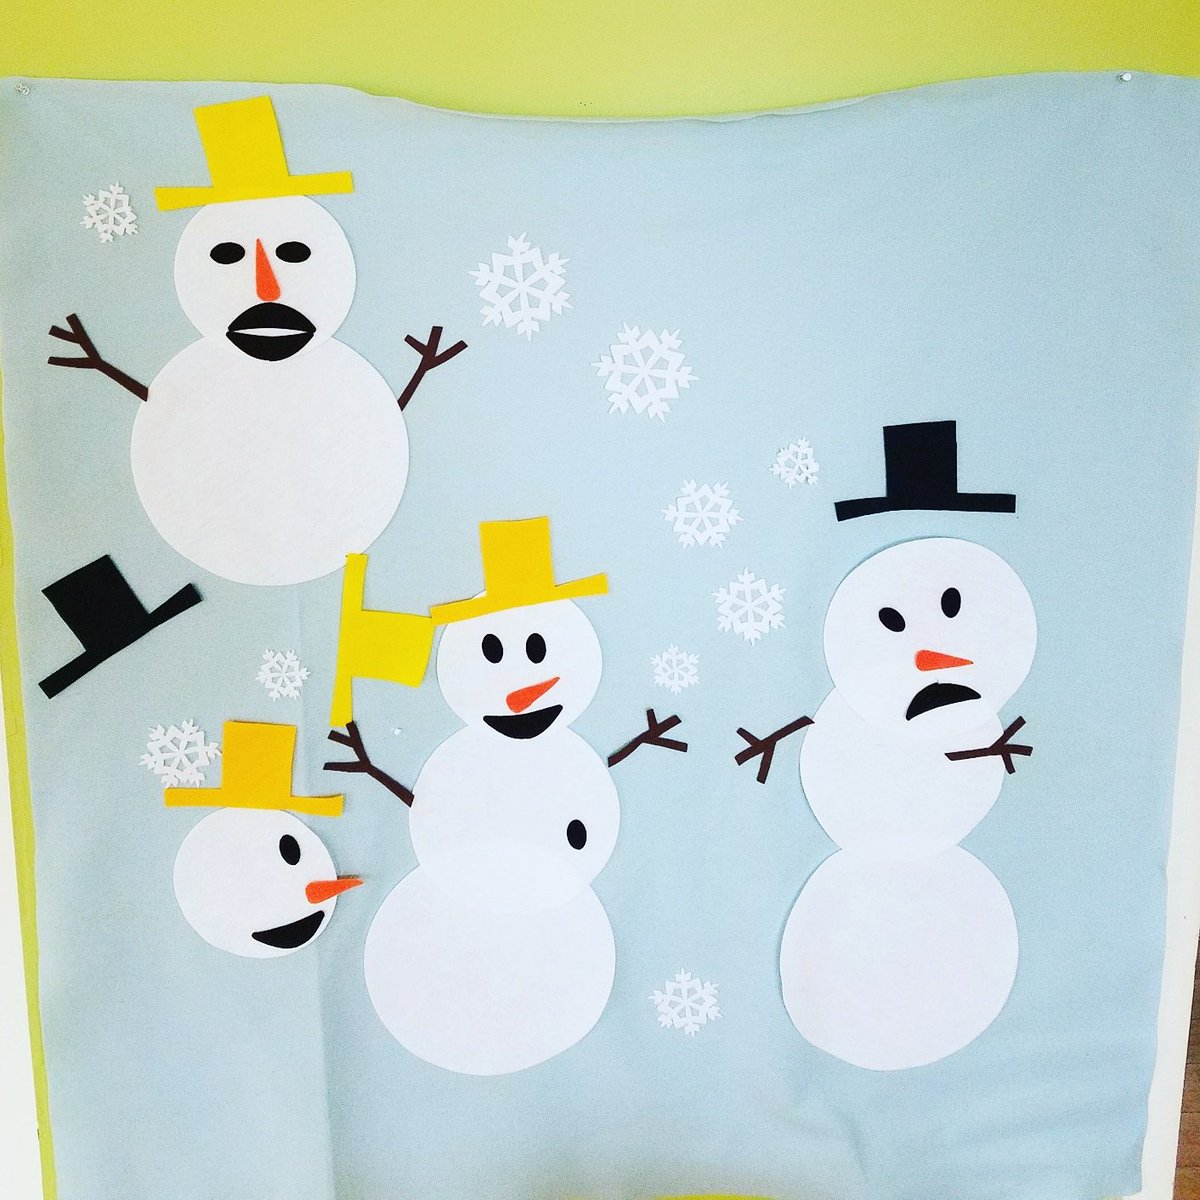 Today in #toddlerart the #kids placed #snowmen on our #felt board along with painting their own wooden snowmen.

#MommyandMe #art #cantonct #avonct #burlingtonct #simsburyct #farmingtonct #granbyct #farmingtonvalley #ctmom #ct #connecticut